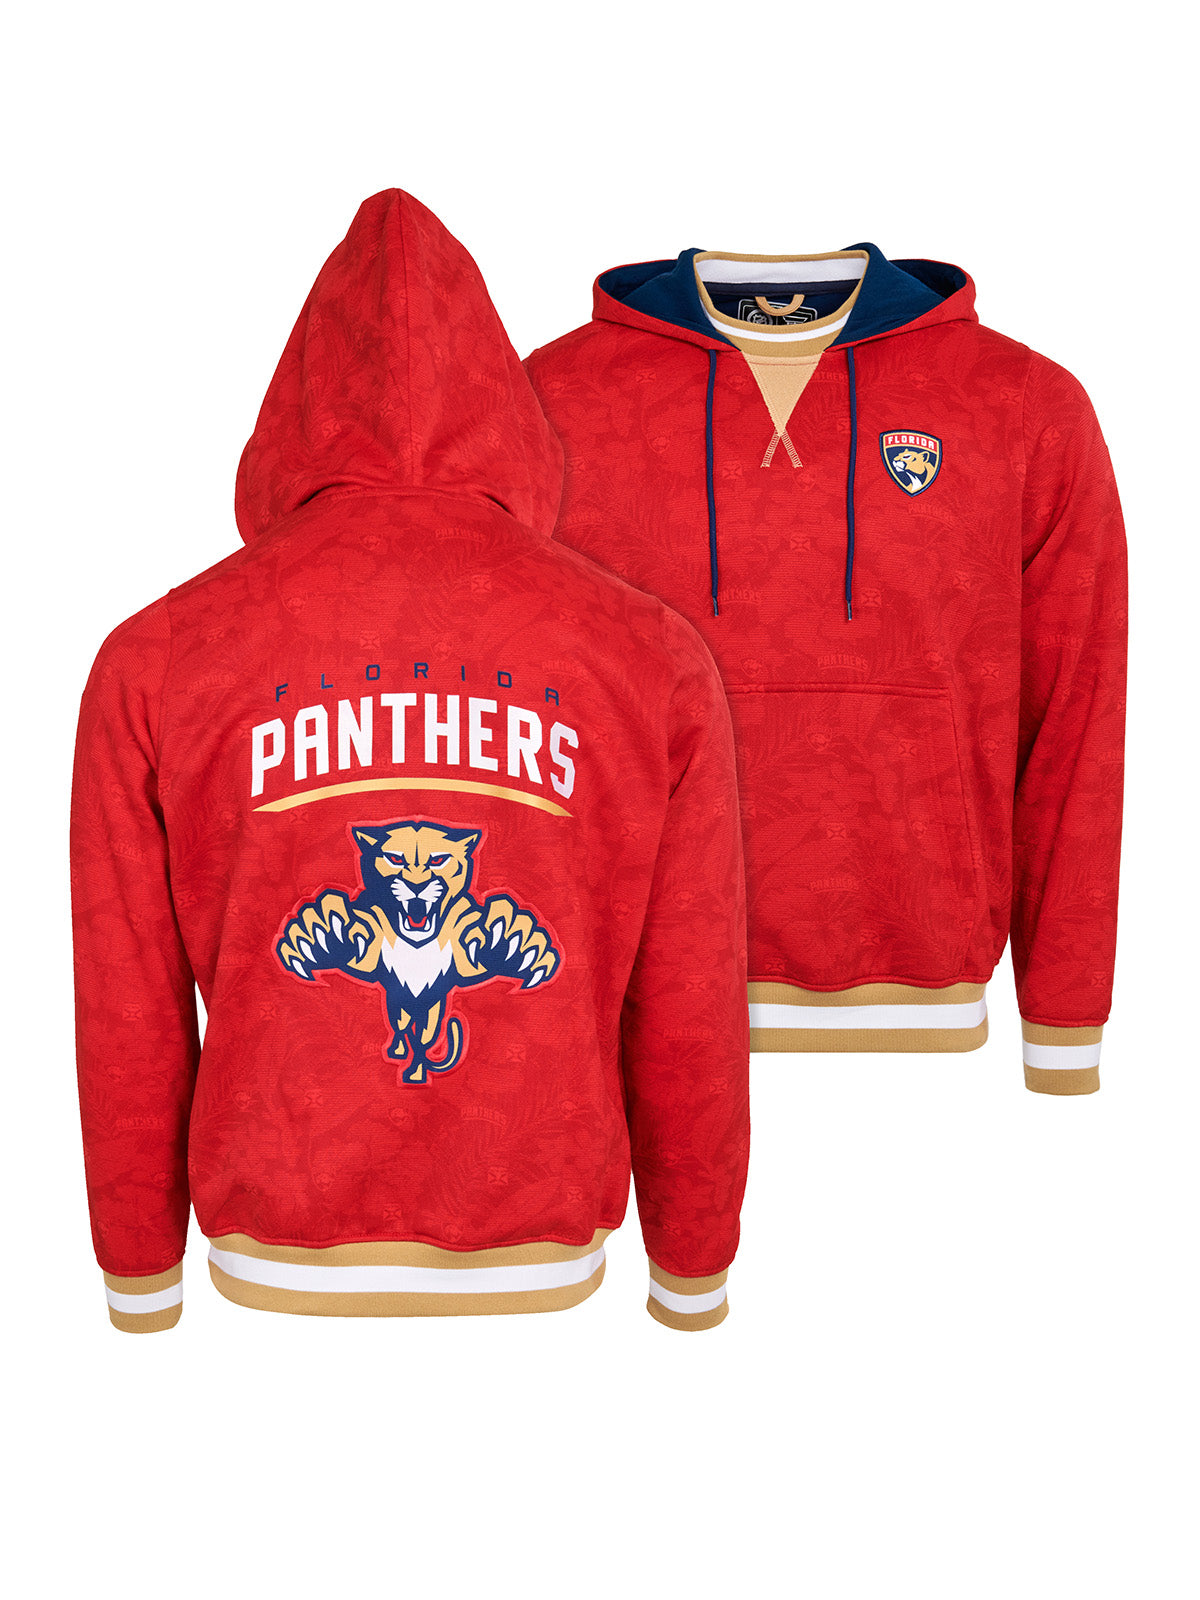 Florida Panthers Hoodie - Show your team spirit, with the iconic team logo patch on the front and back, and proudly display your Florida Panthers support in their team colors with this NHL hockey hoodie.